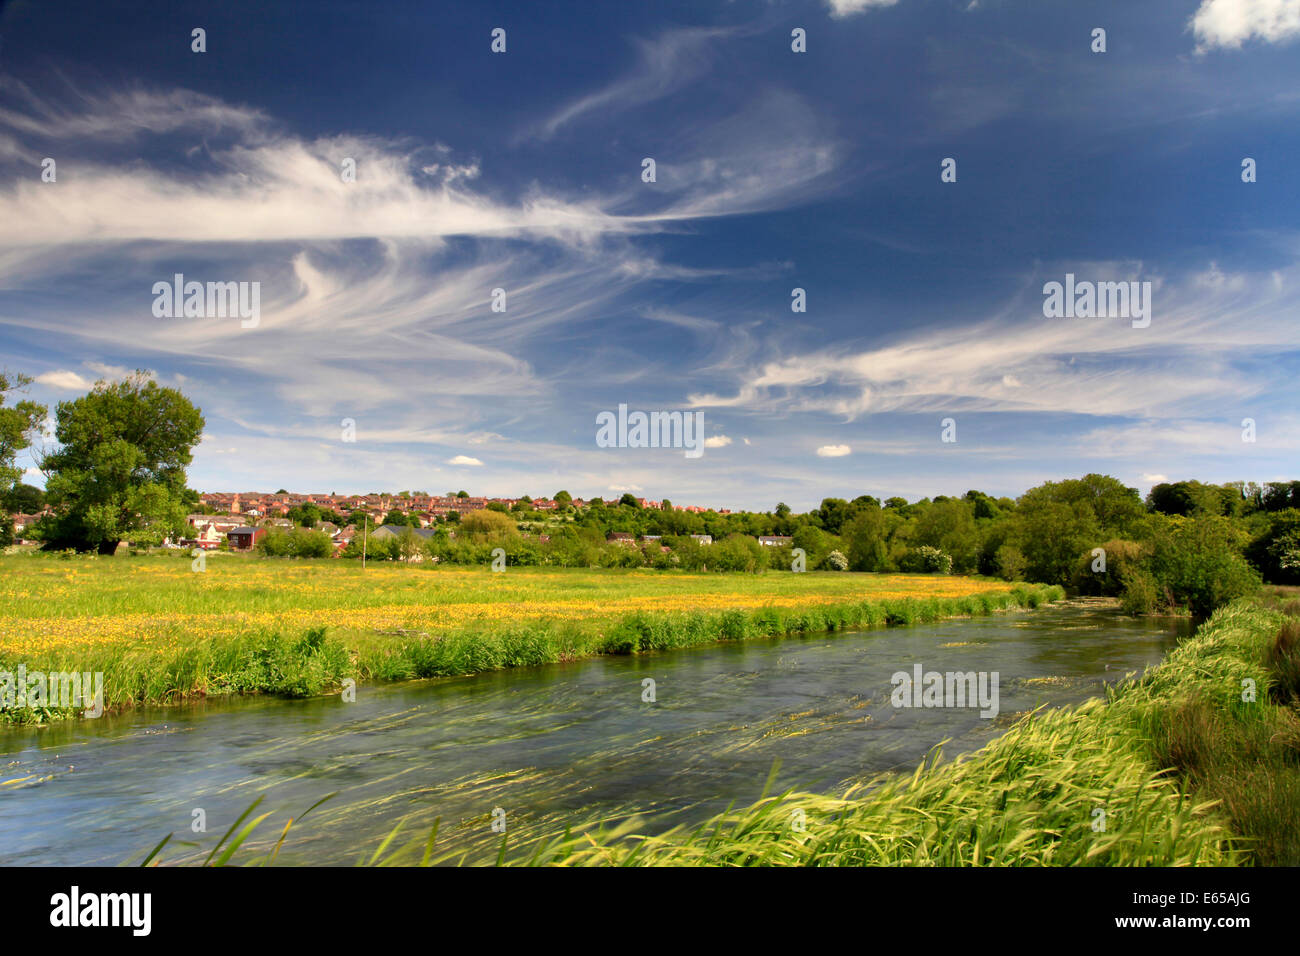 The River Avon and water meadows at Amesbury, Wiltshire, England. Stock Photo